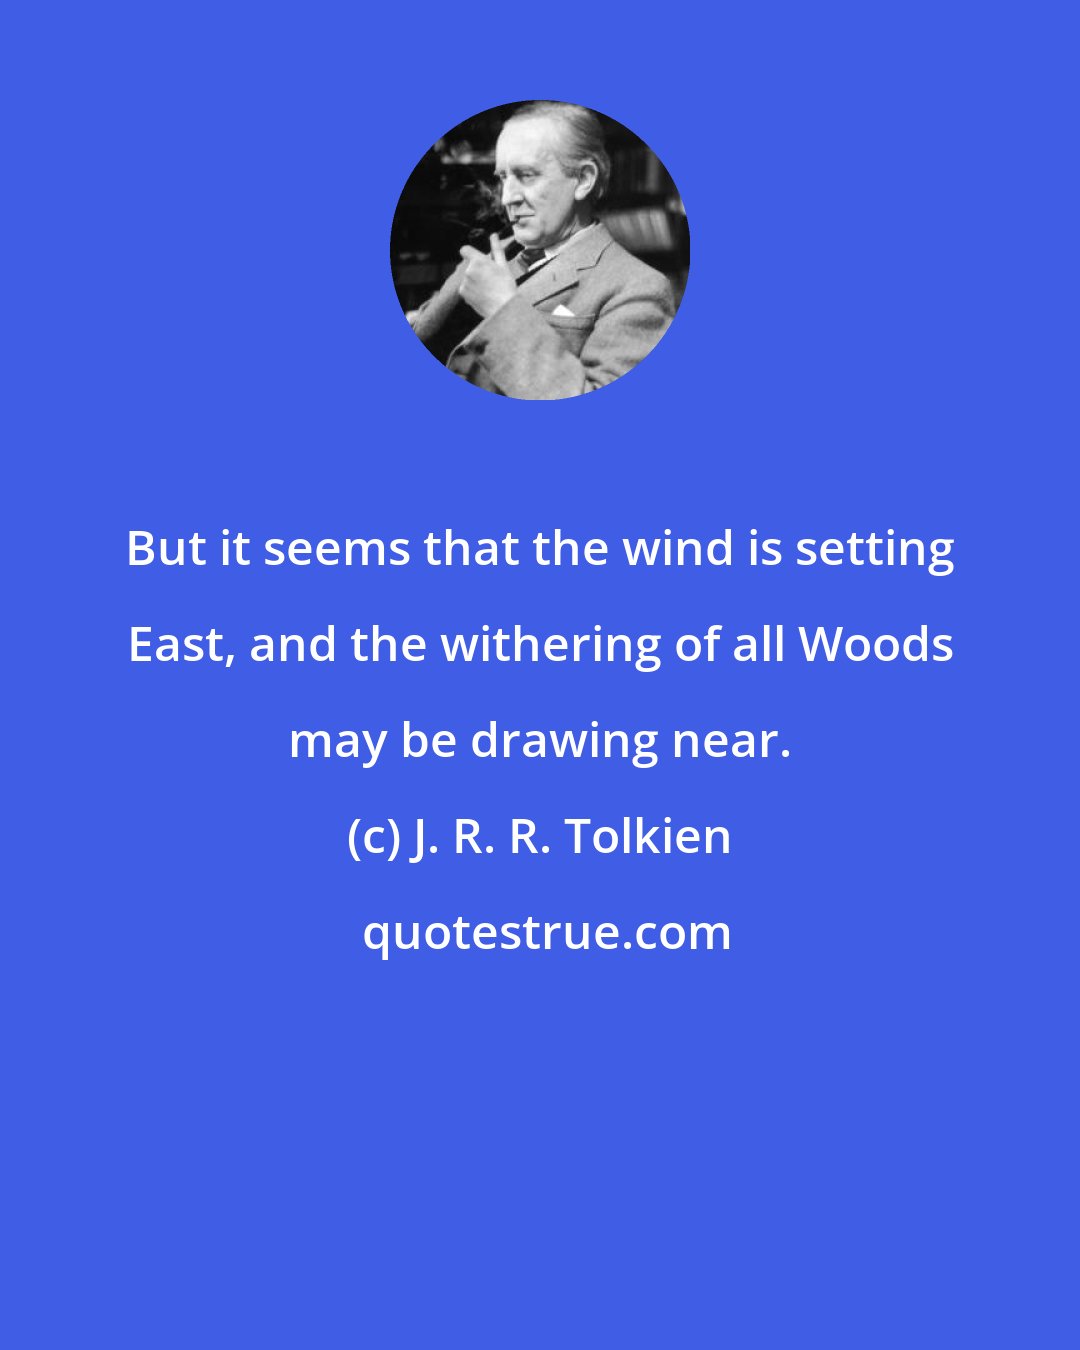 J. R. R. Tolkien: But it seems that the wind is setting East, and the withering of all Woods may be drawing near.